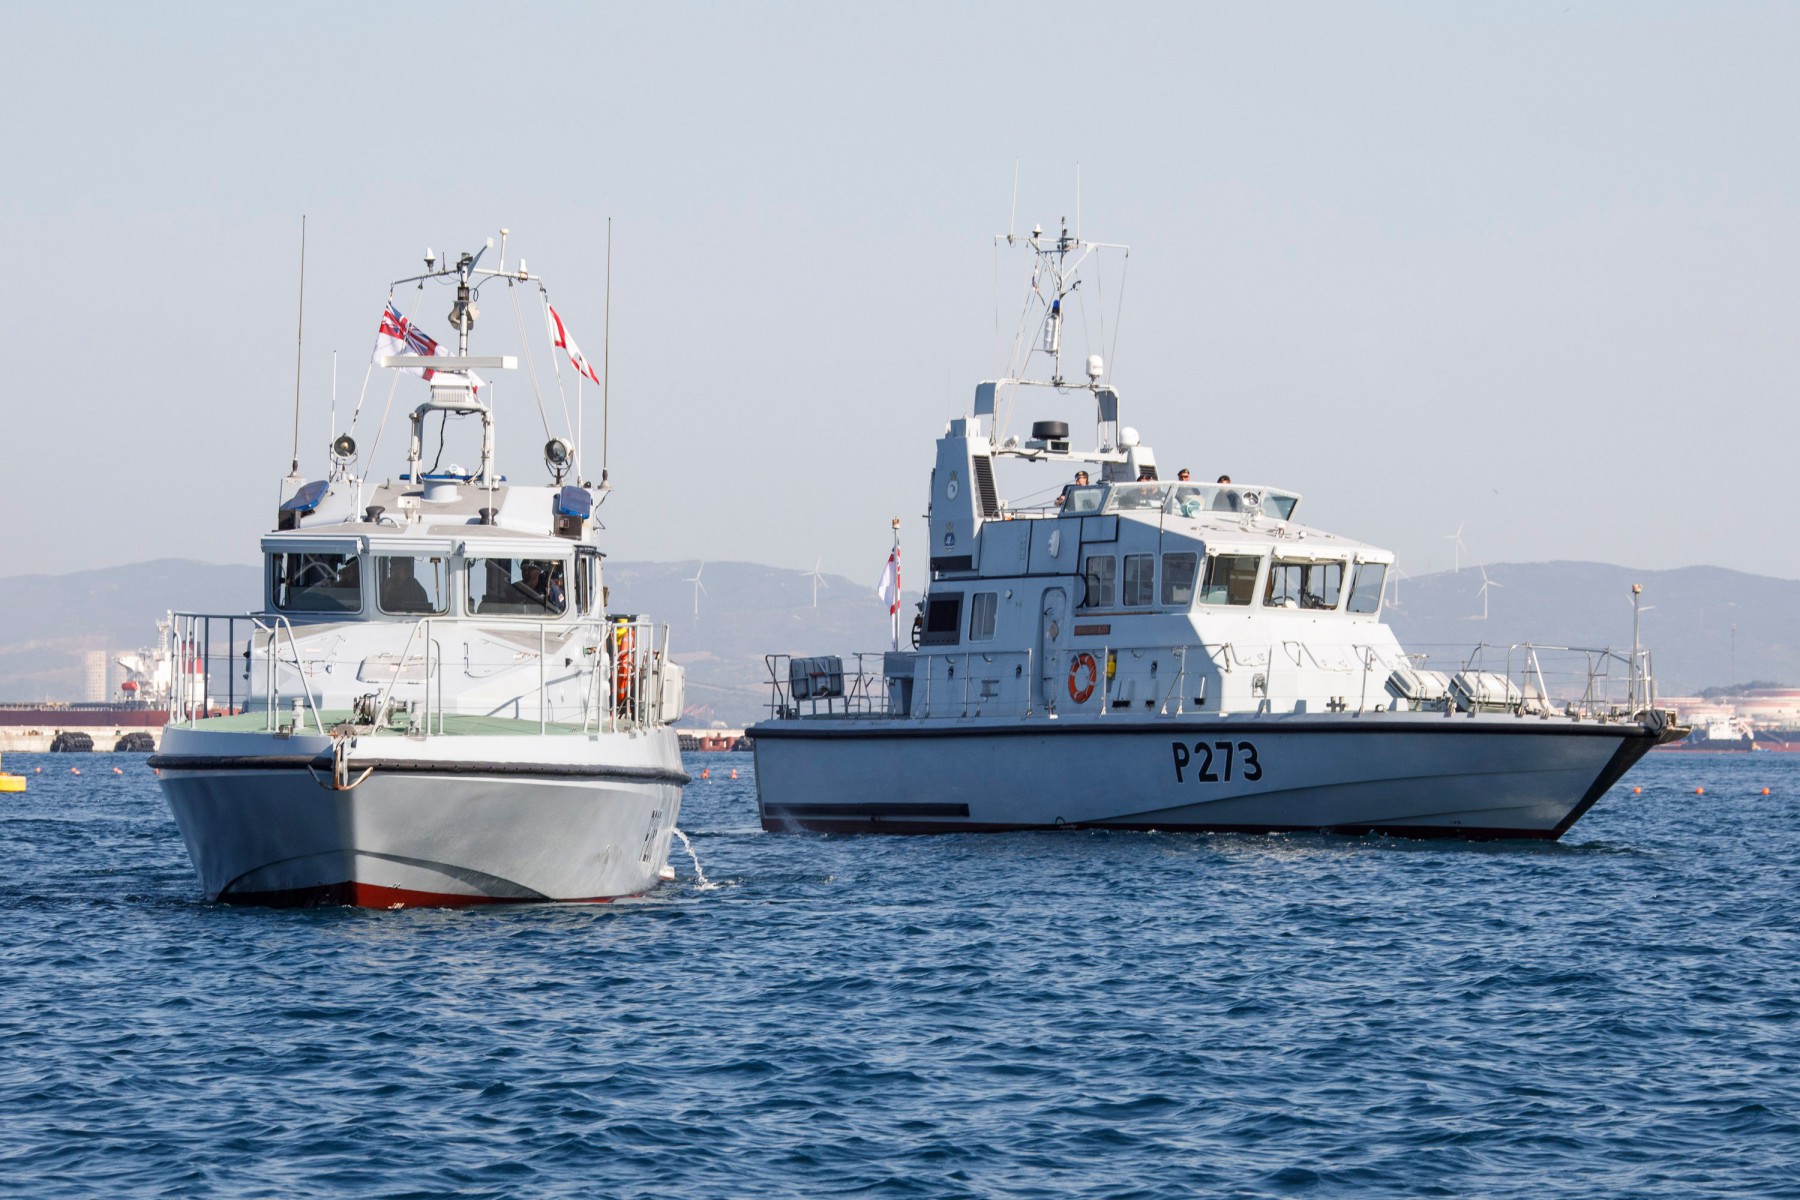 Royal Navy Gibraltar Squadron with four boats at sea.